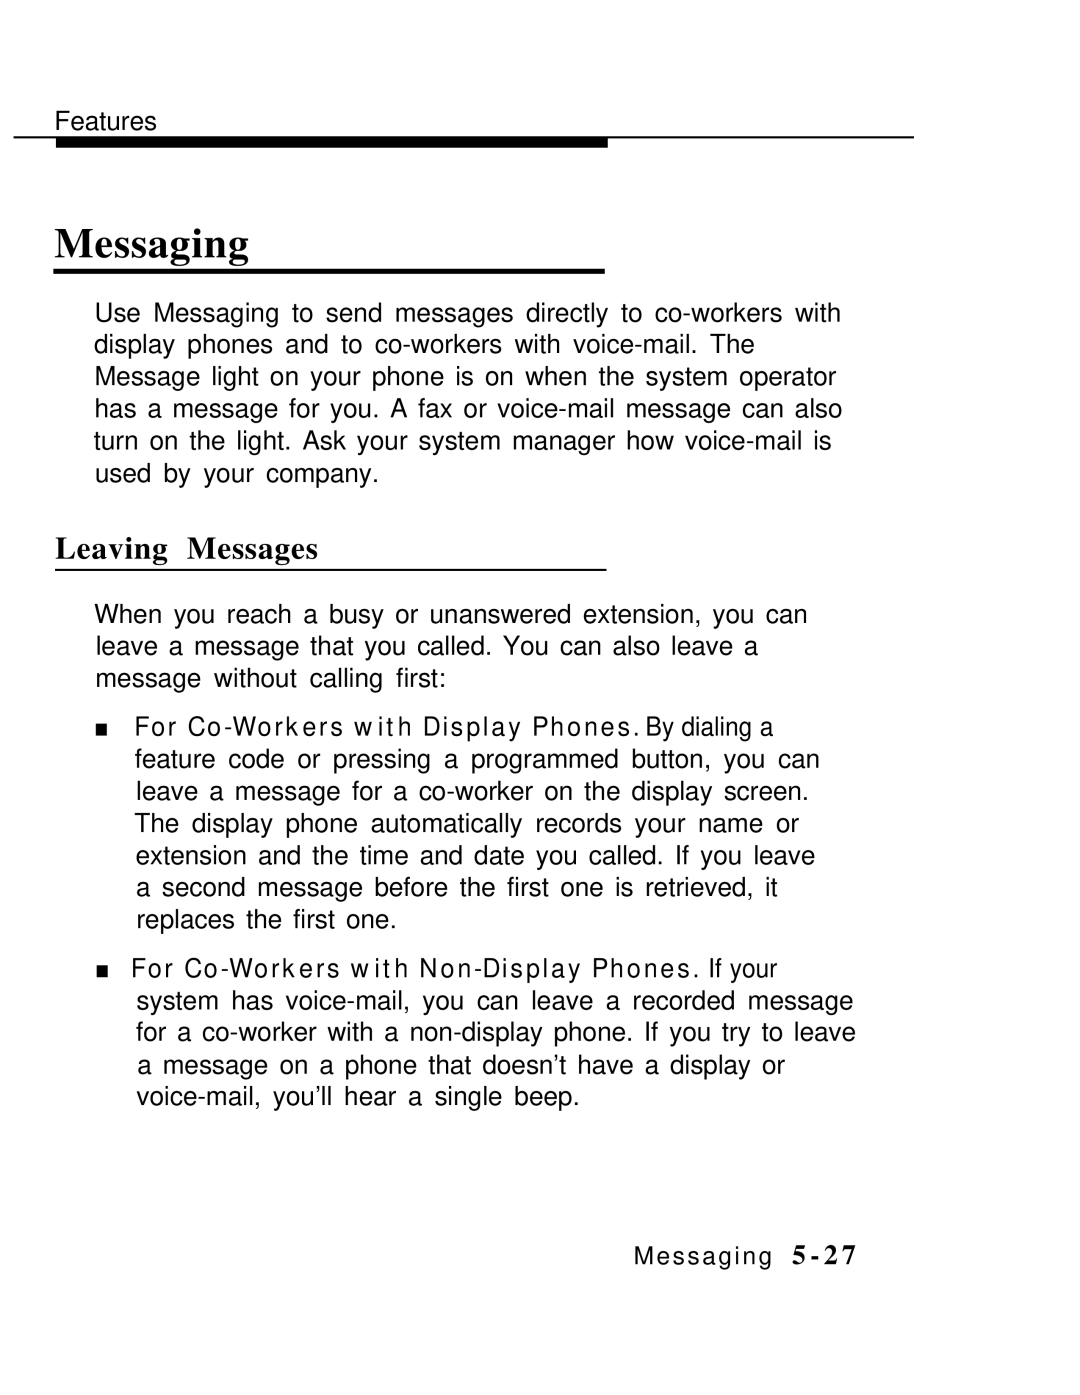 AT&T MLX-10 manual Messaging, Leaving Messages 